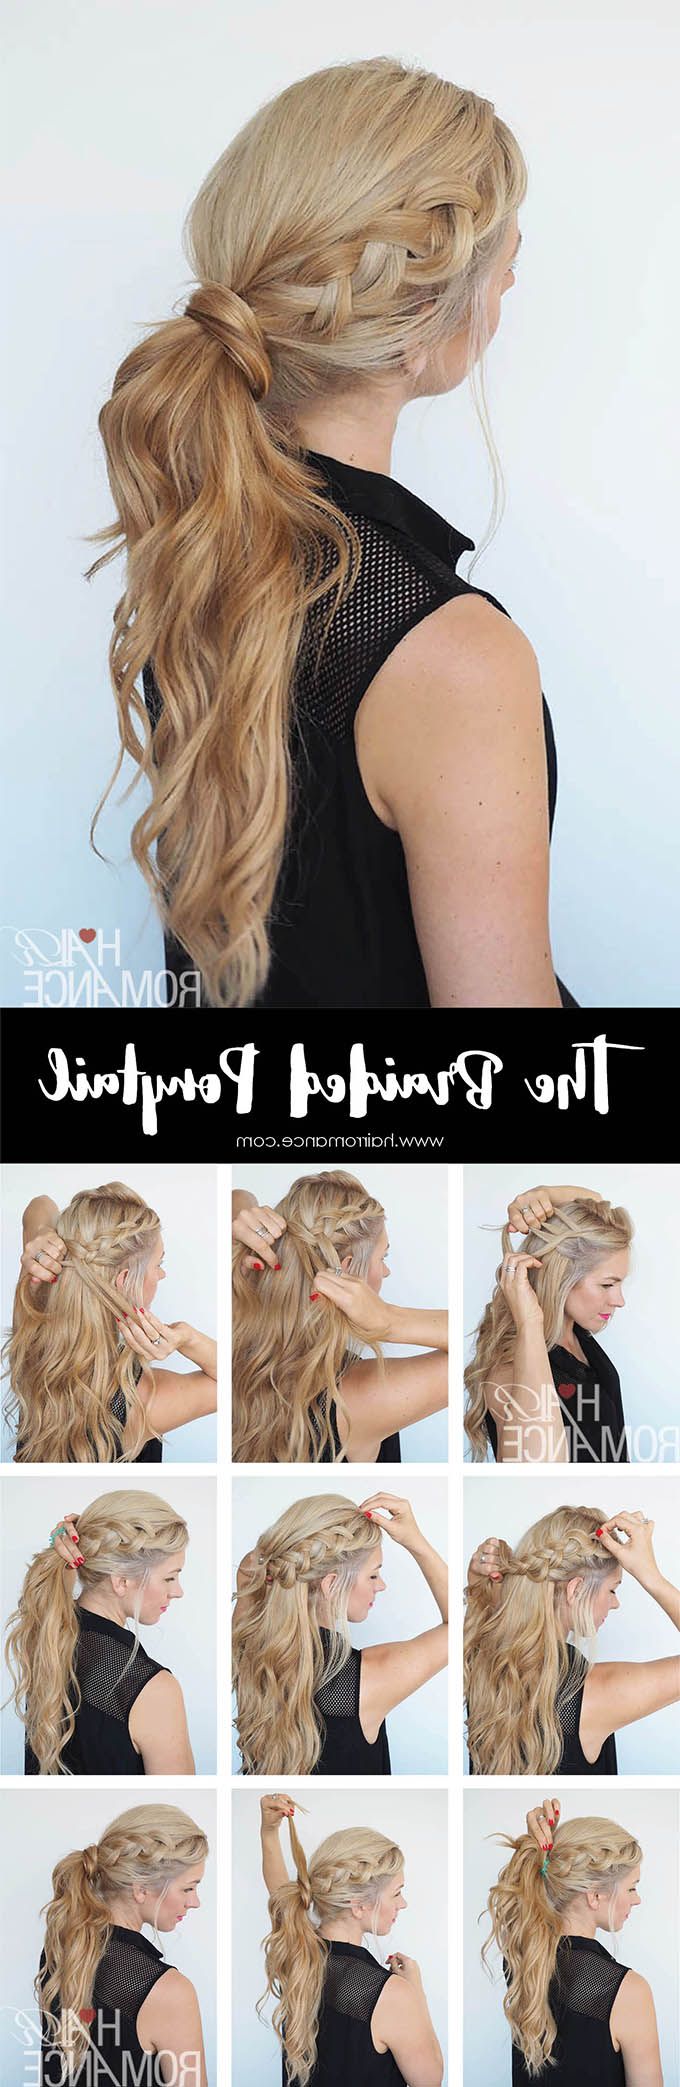 Latest Romantic Ponytail Updo Hairstyles Pertaining To Get Out Of A Hair Rut – Braided Ponytail Hairstyle Tutorial (View 19 of 20)